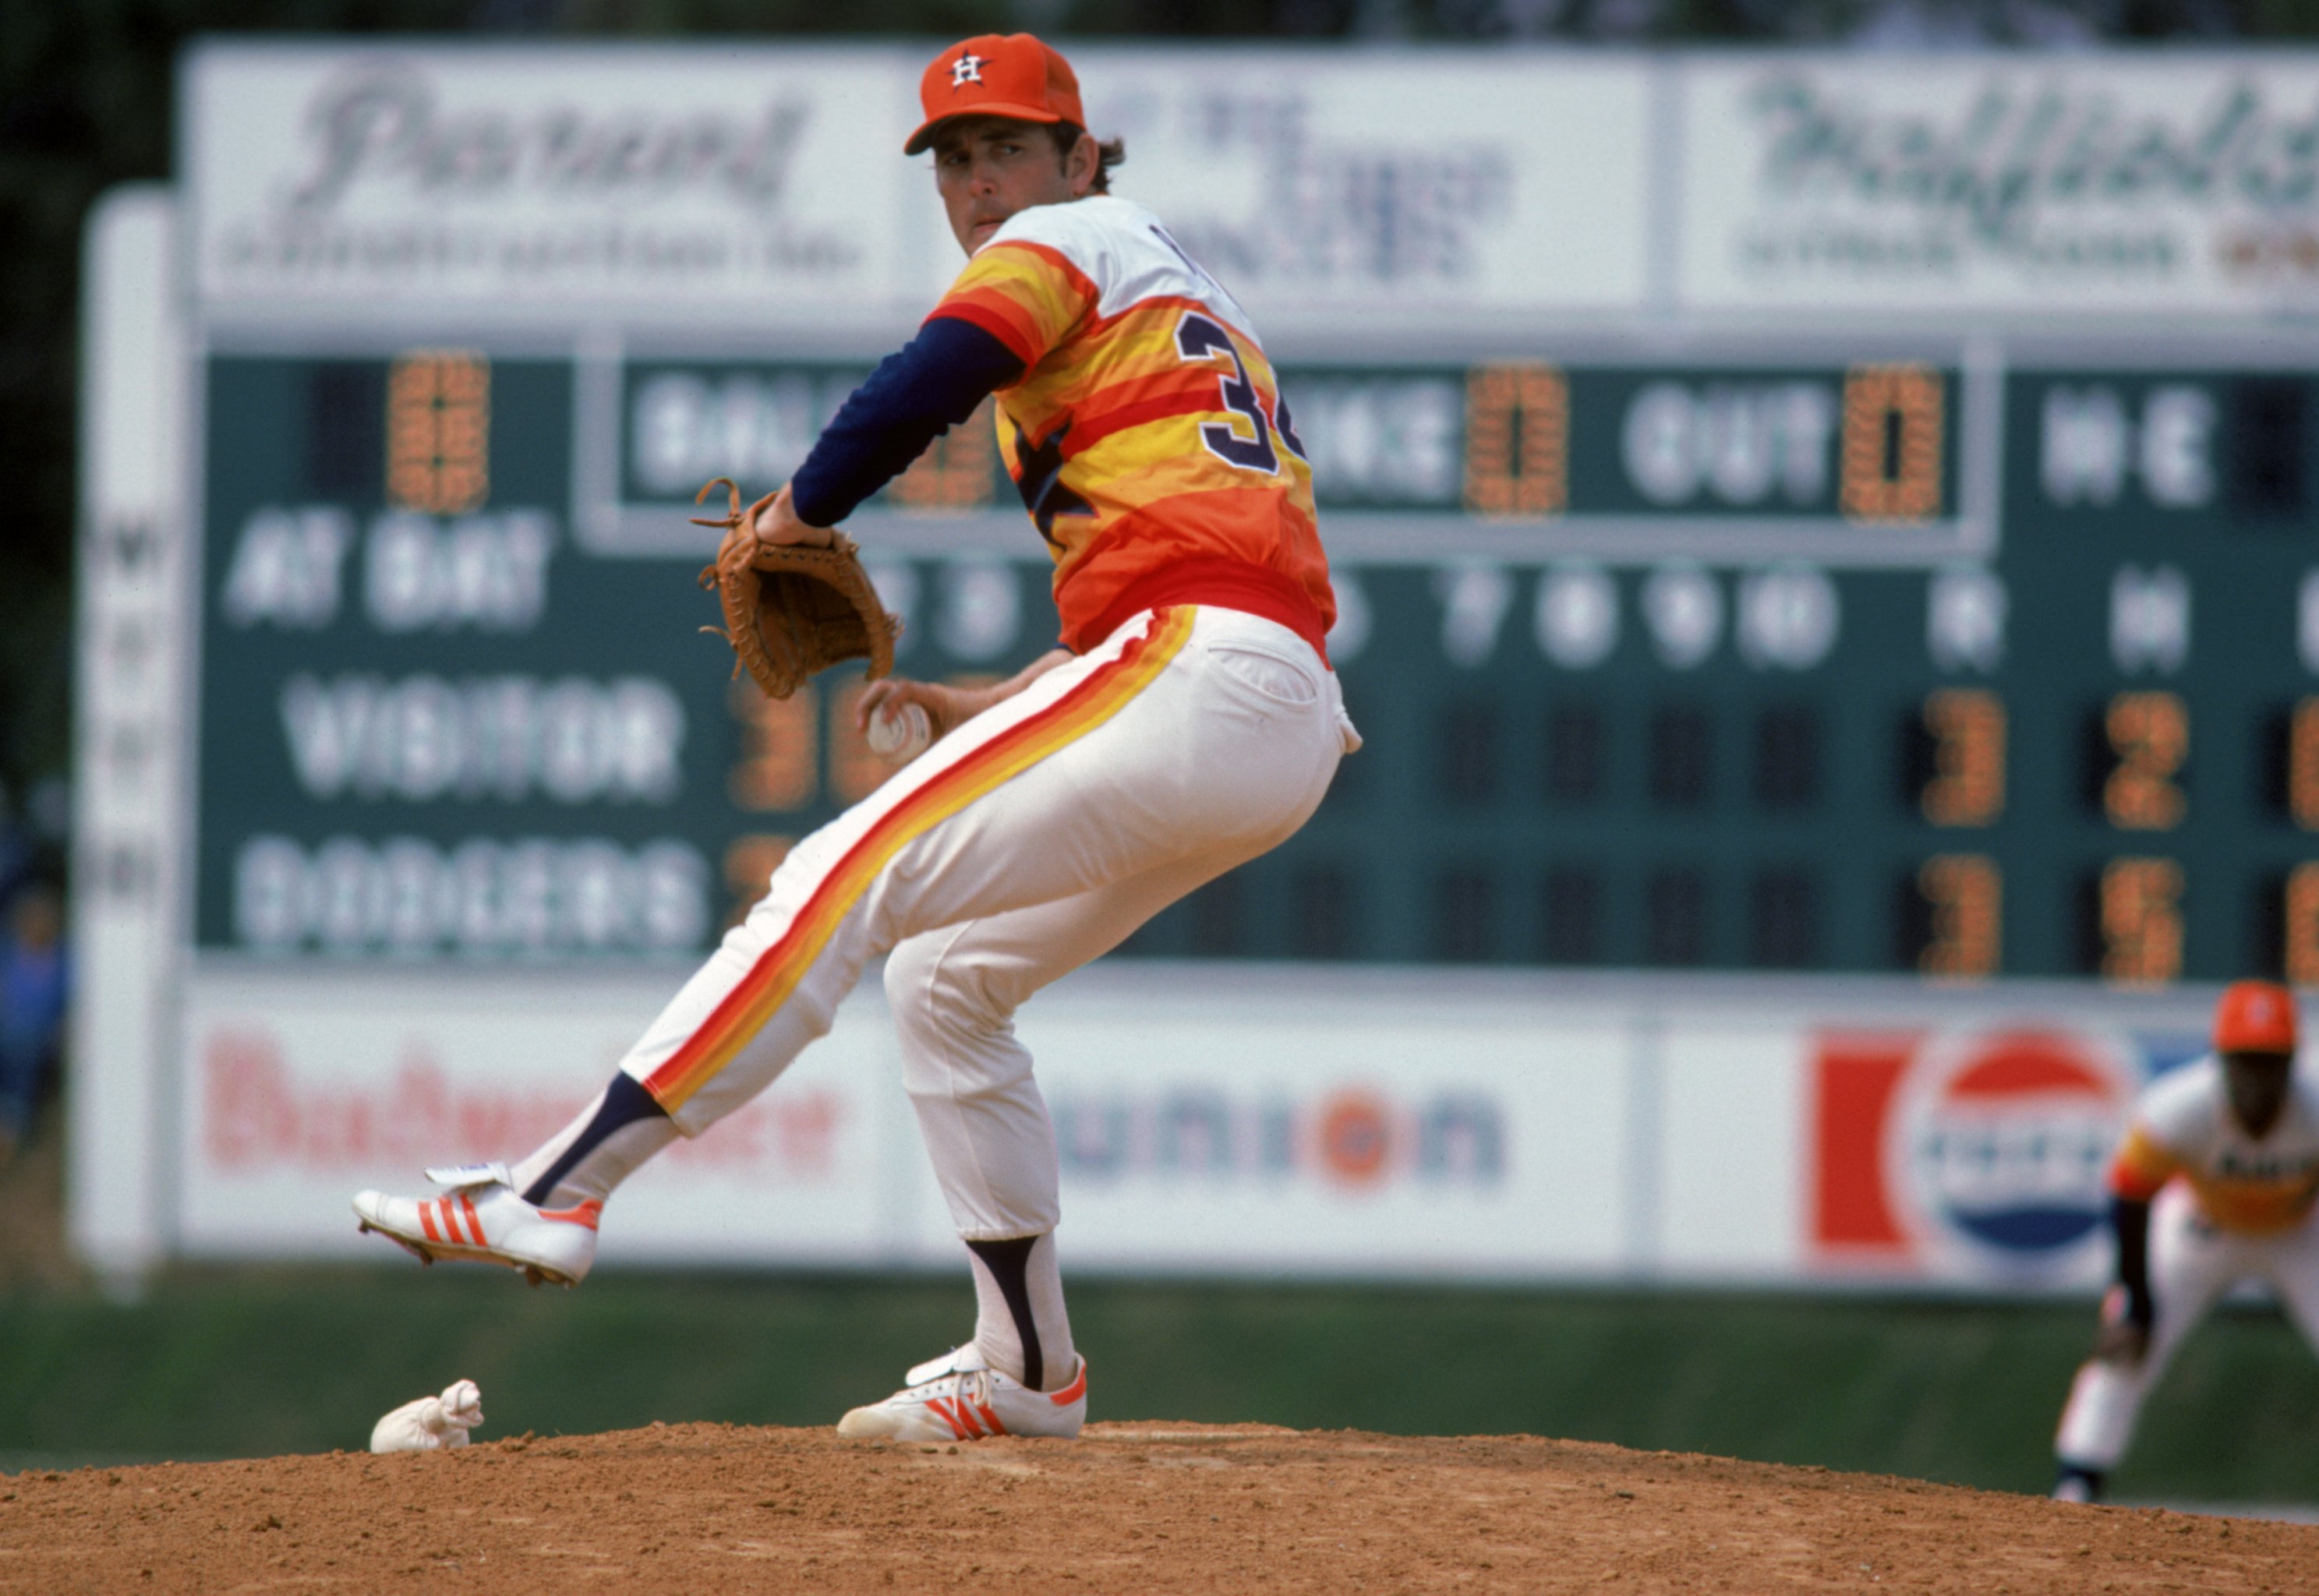 5 MLB throwback uniforms we'd like to see in 2020